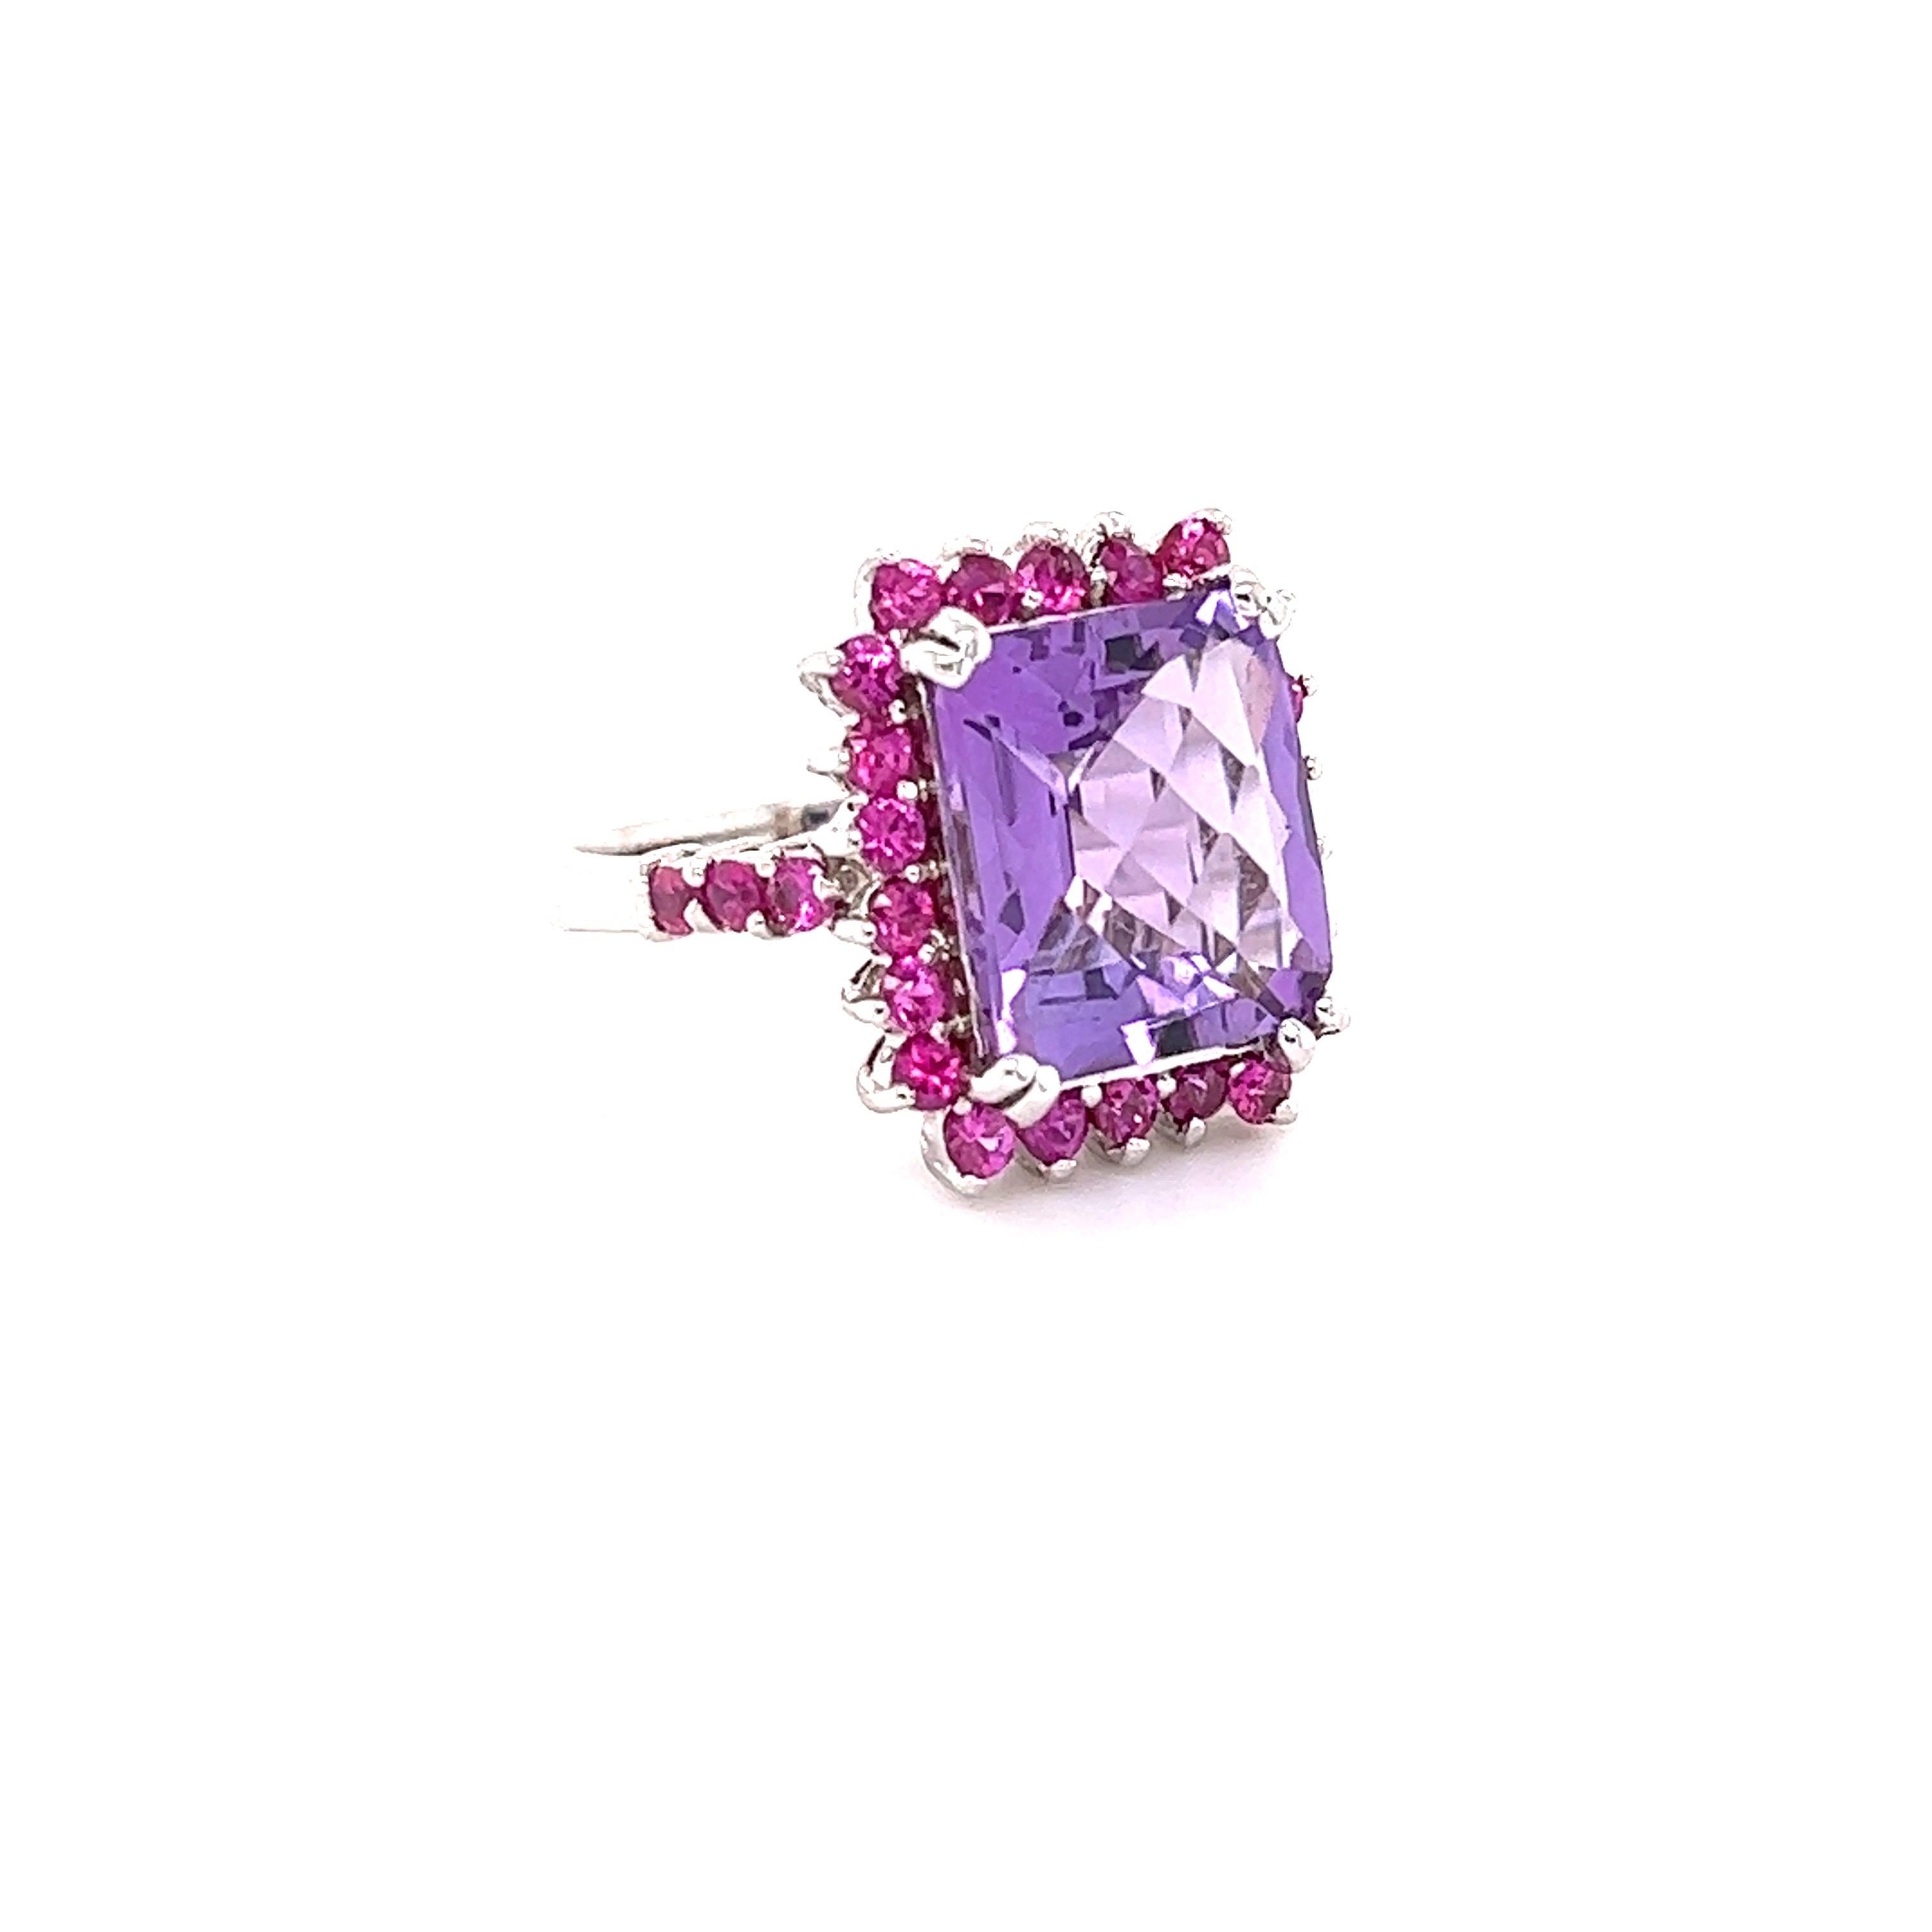 This ring has a Emerald Cut Amethyst that weighs 5.57 carats and it has 18 Pink Sapphires that weigh 1.22 carats.
The total carat weight of the ring is 6.79 carats. 

Curated in 14 Karat White Gold and weighs approximately 5.9 grams. 

The ring is a